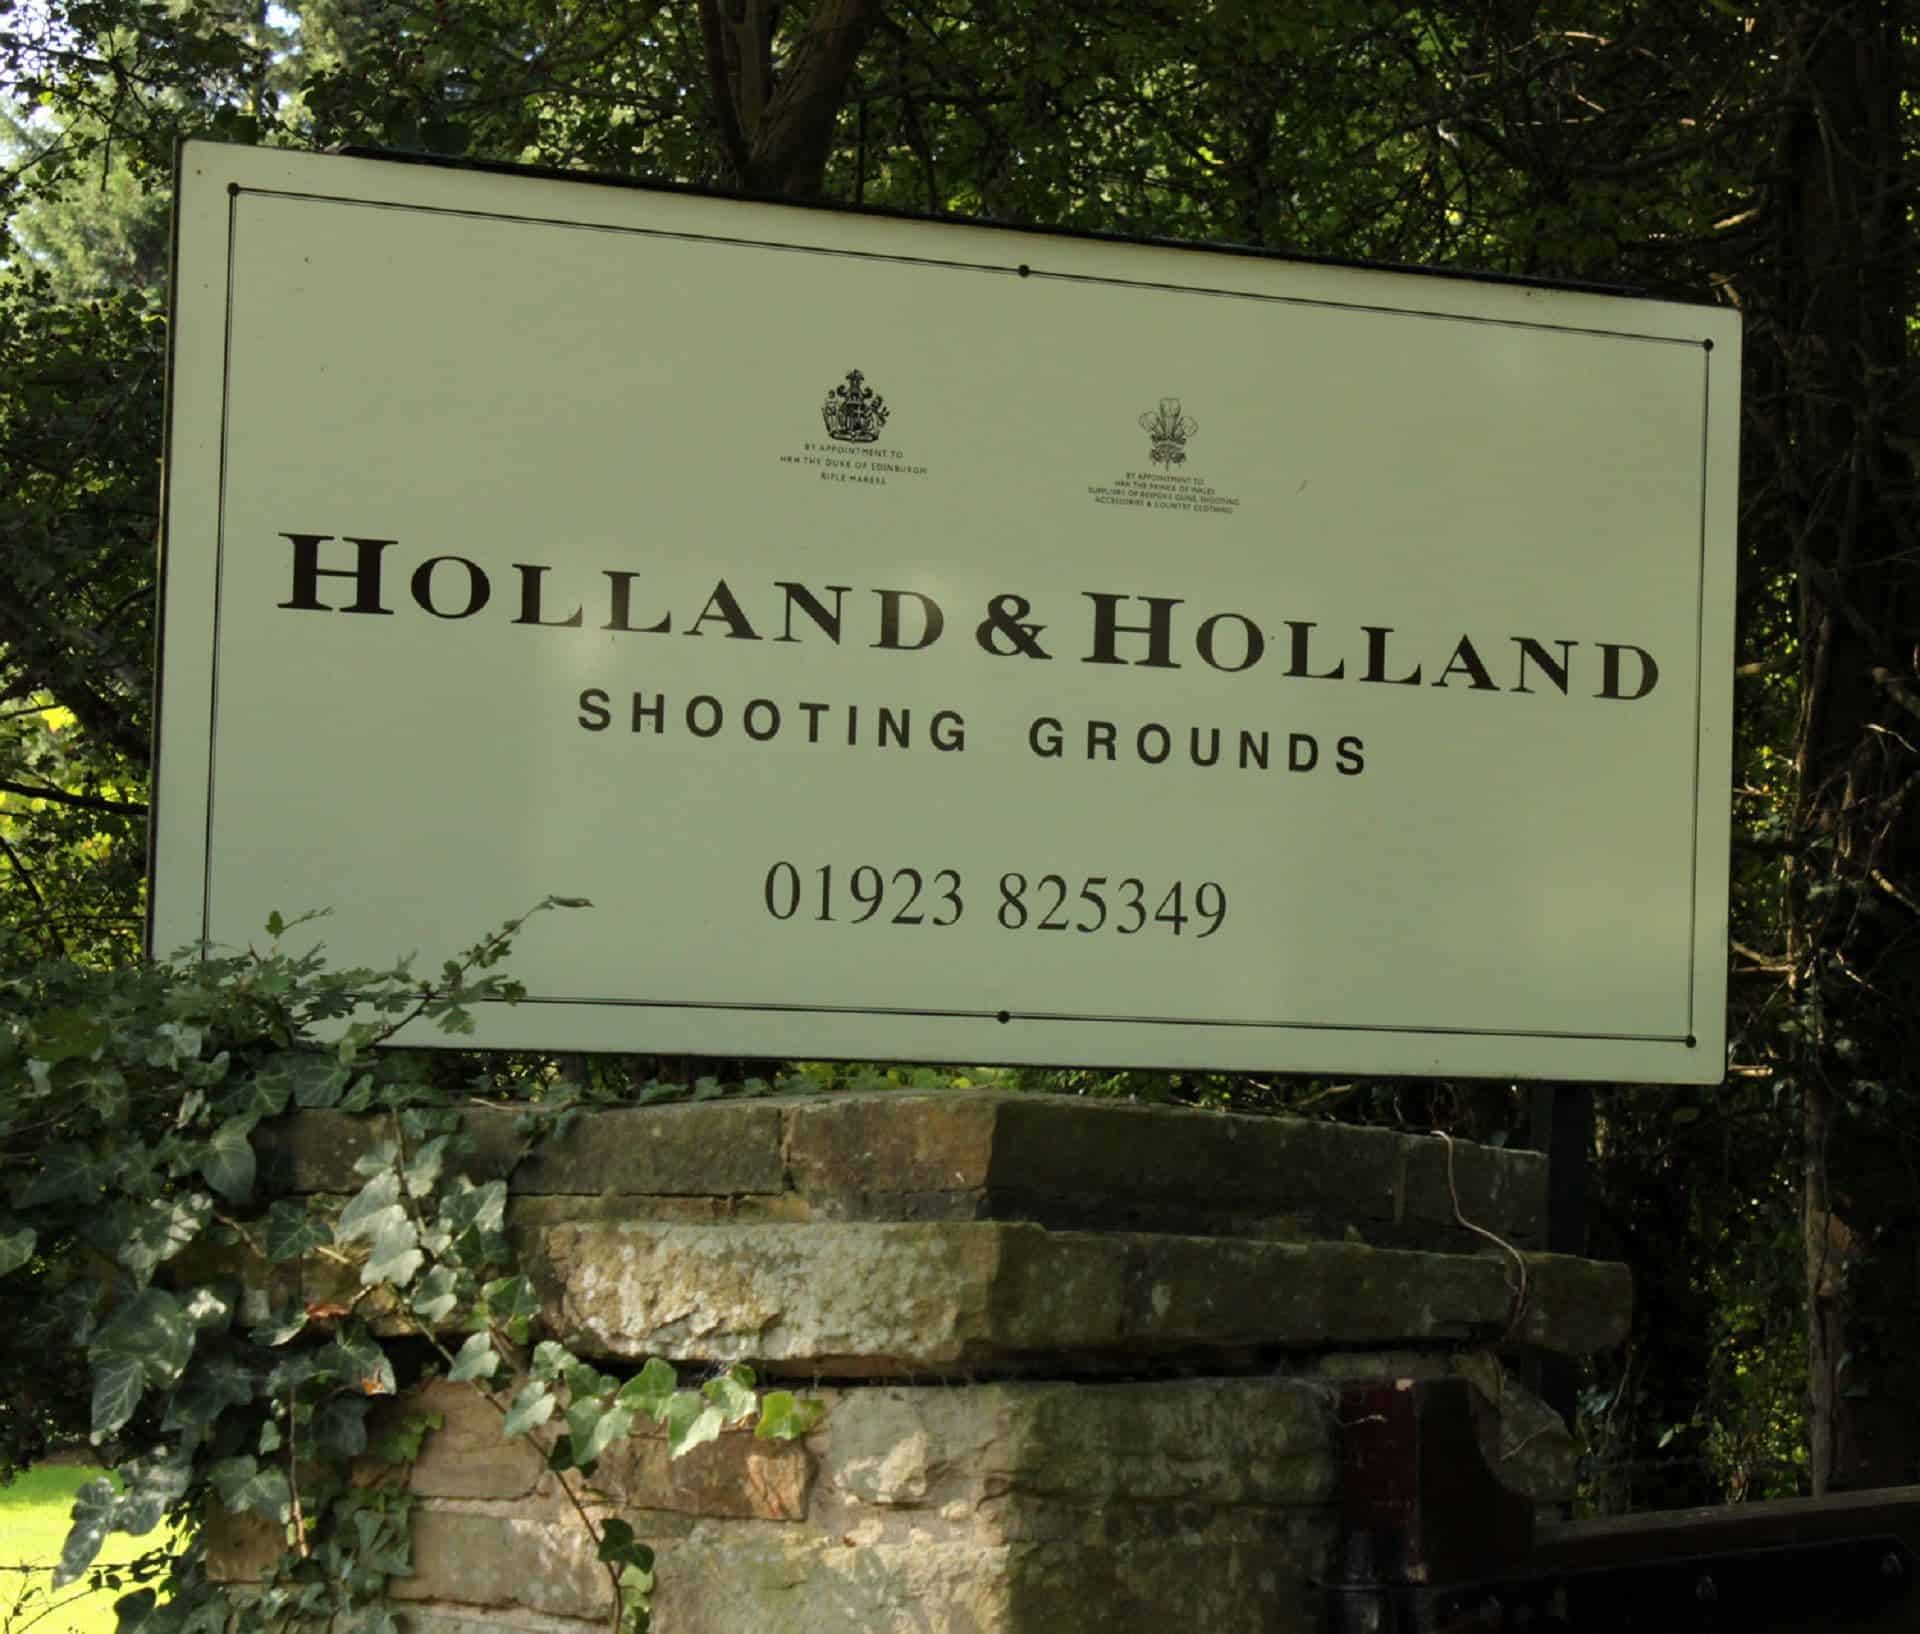 Holland & Holland Shooting Grounds in UK